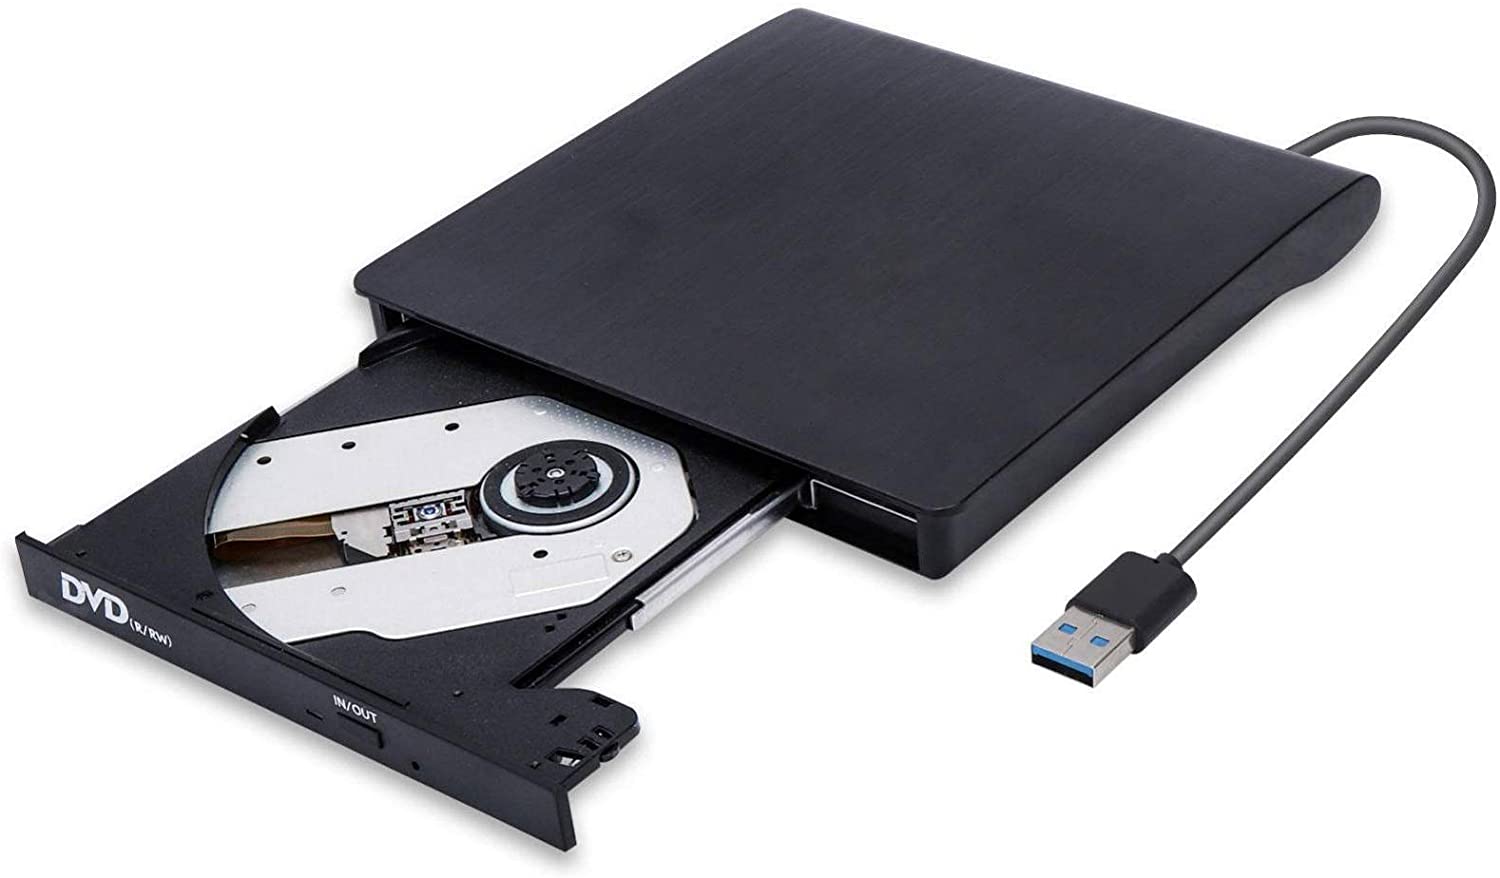 USB 2.0 External CD/DVD Drive for Asus Eee Pc 1018pd